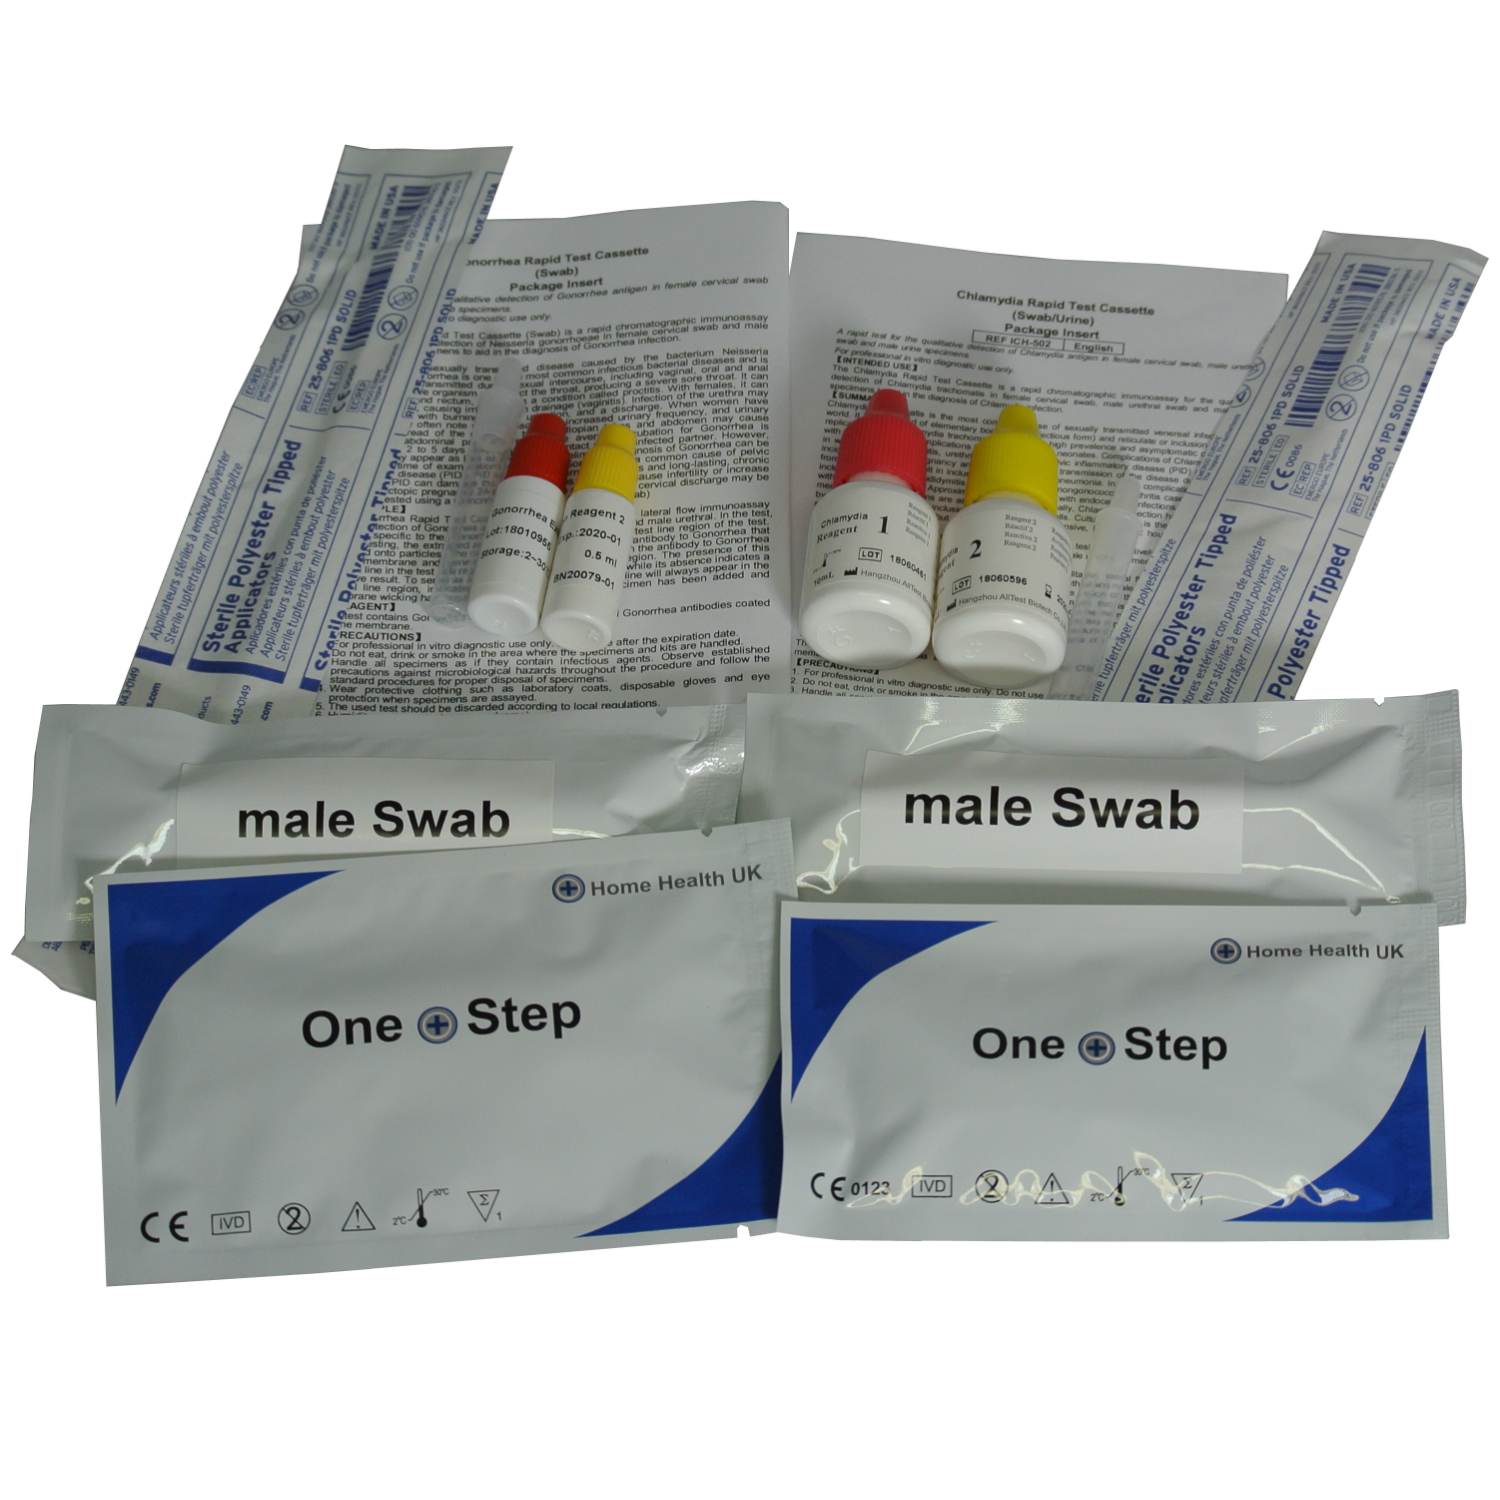 Can You Buy At Home Drug Test Kits